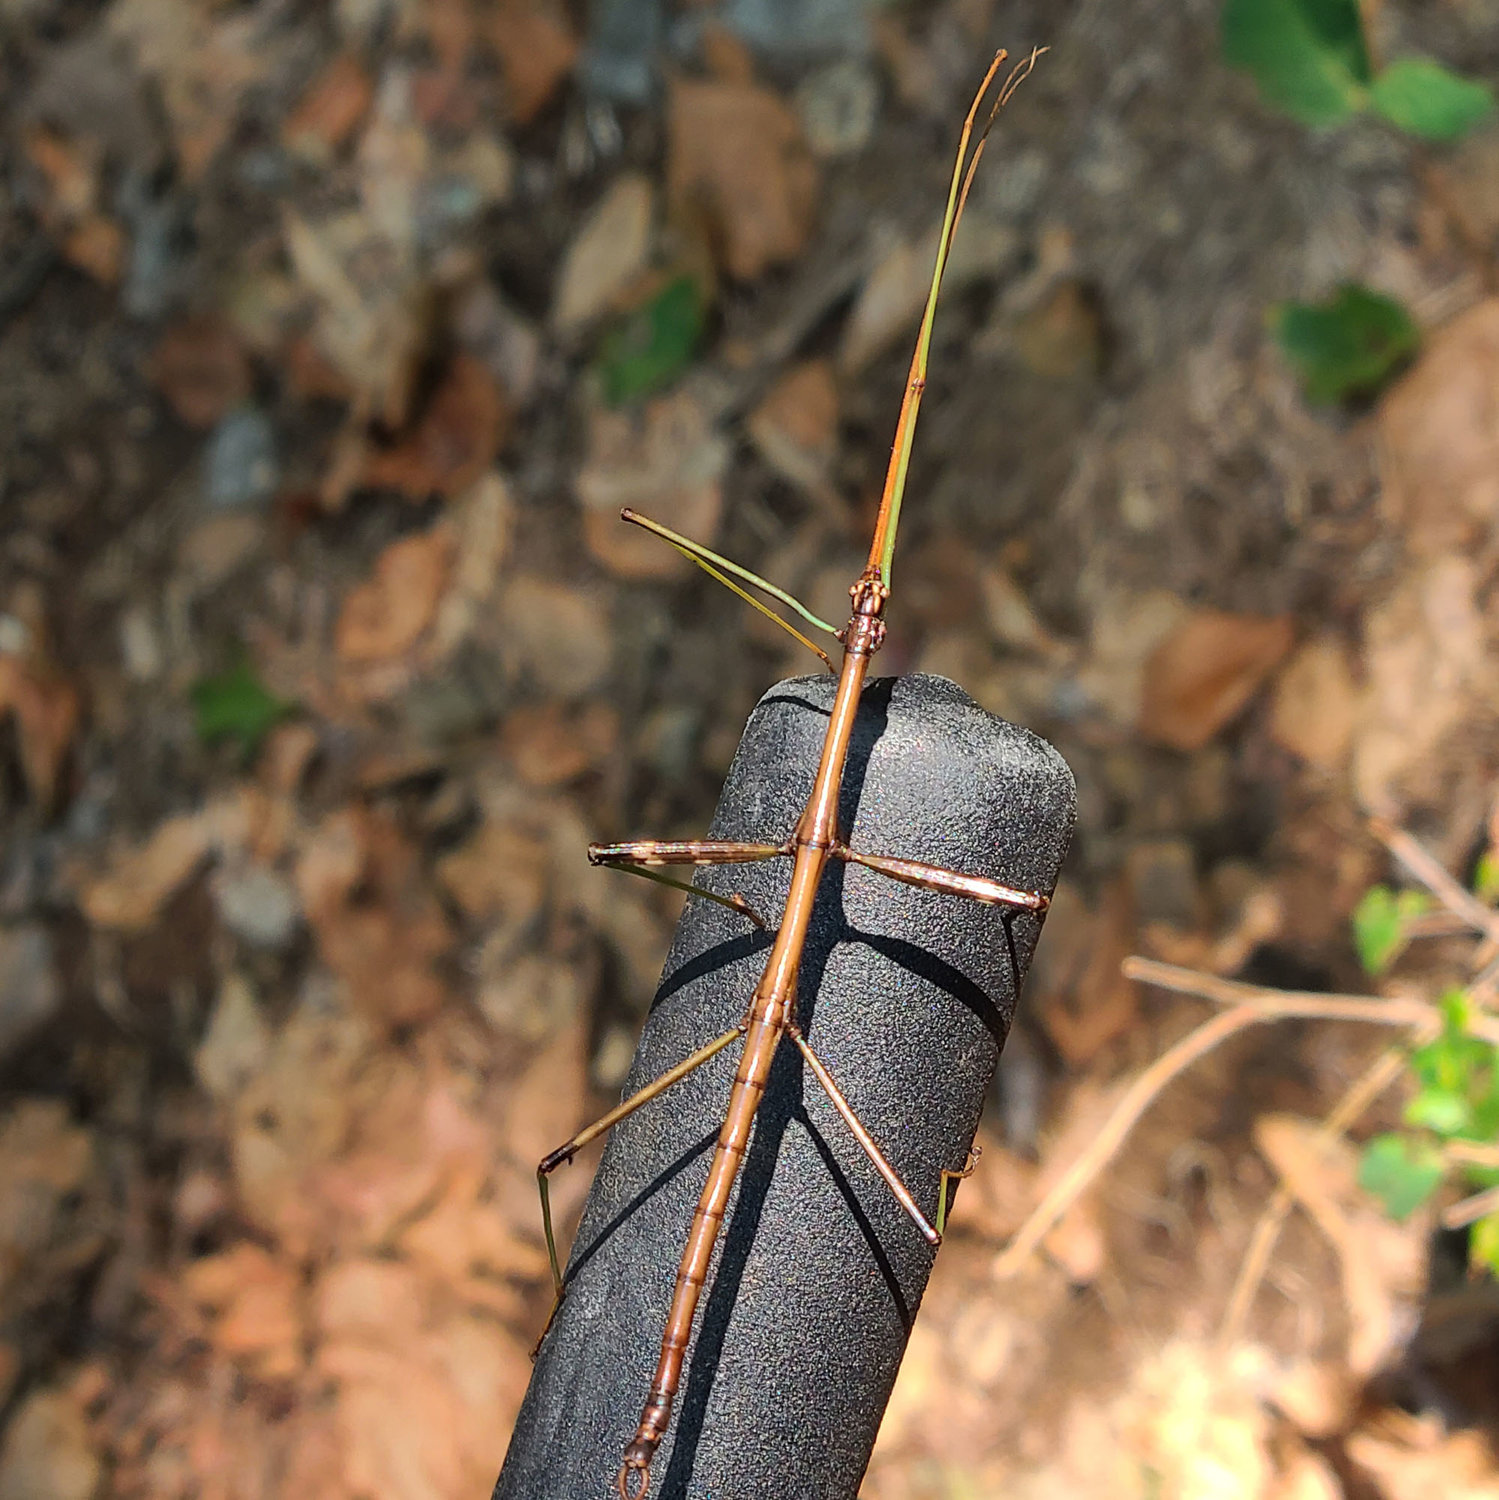 This walkingstick was also found in September and made its way onto a tool handle during a field trip. This individual shows a mostly brown color with a little bit of green; I find maybe a couple per year, mostly on oak tree trunks. Other characteristics include a thorax, which is about half the body length, and long antennae. ..This individual is missing a right foreleg. Depending on the season, walkingsticks can regenerate a limb fully or partially. Walkingsticks may sacrifice a leg to escape a predator.